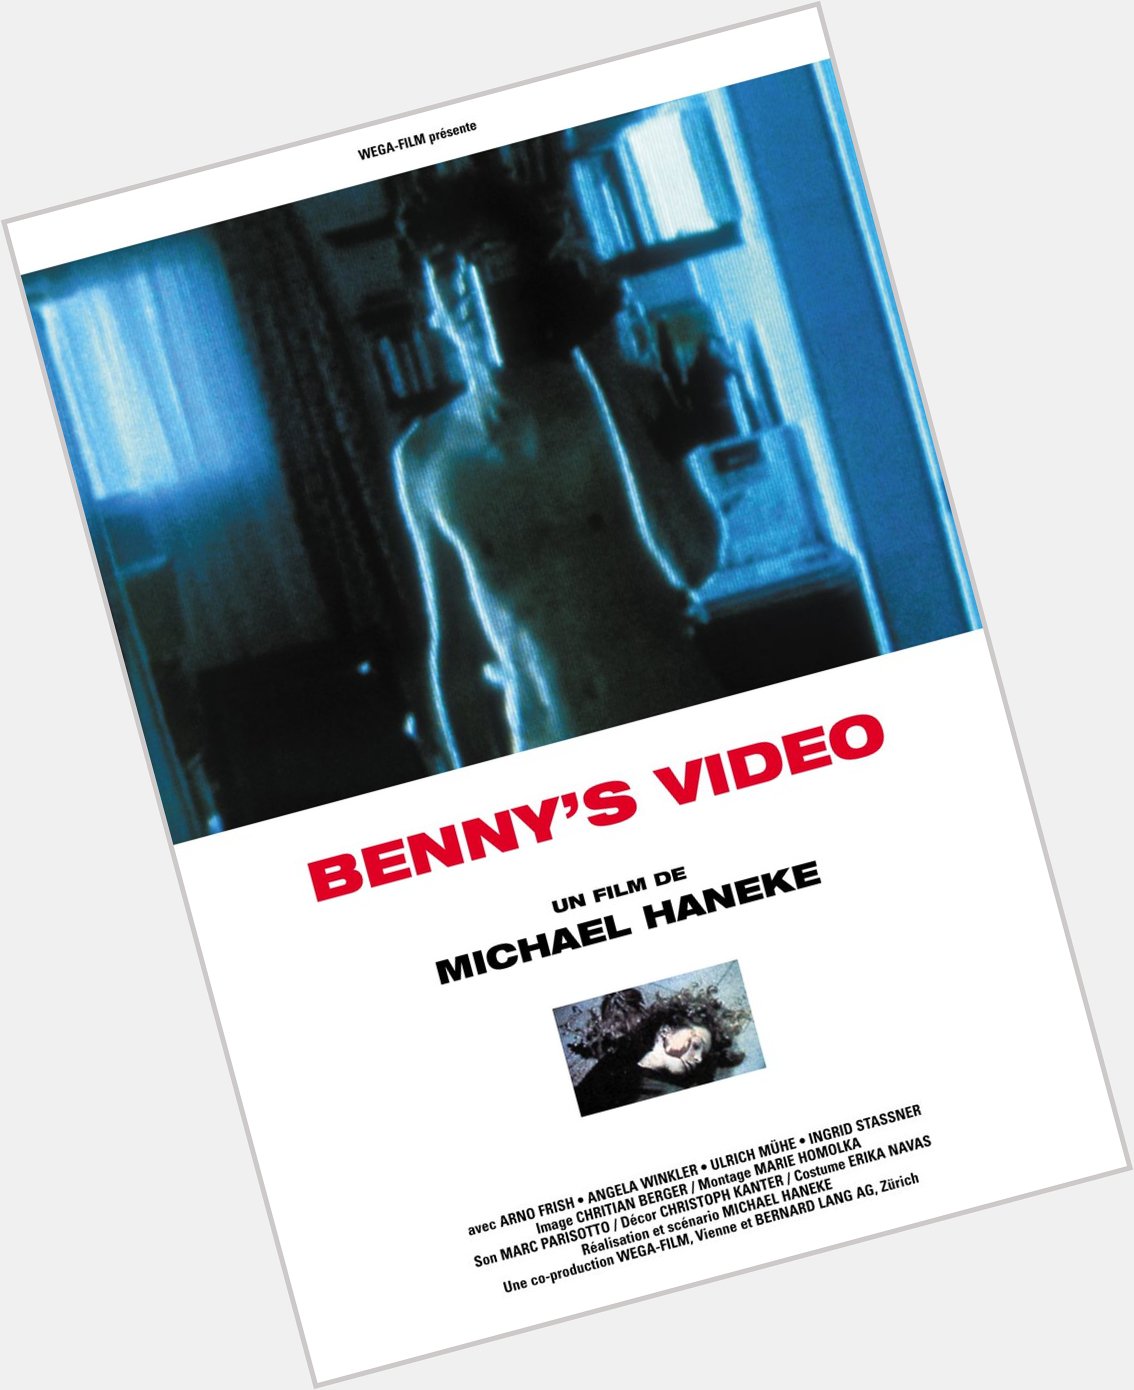 Happy bday to the wonderful maniac michael haneke- benny s video is now on if you want to celebrate 